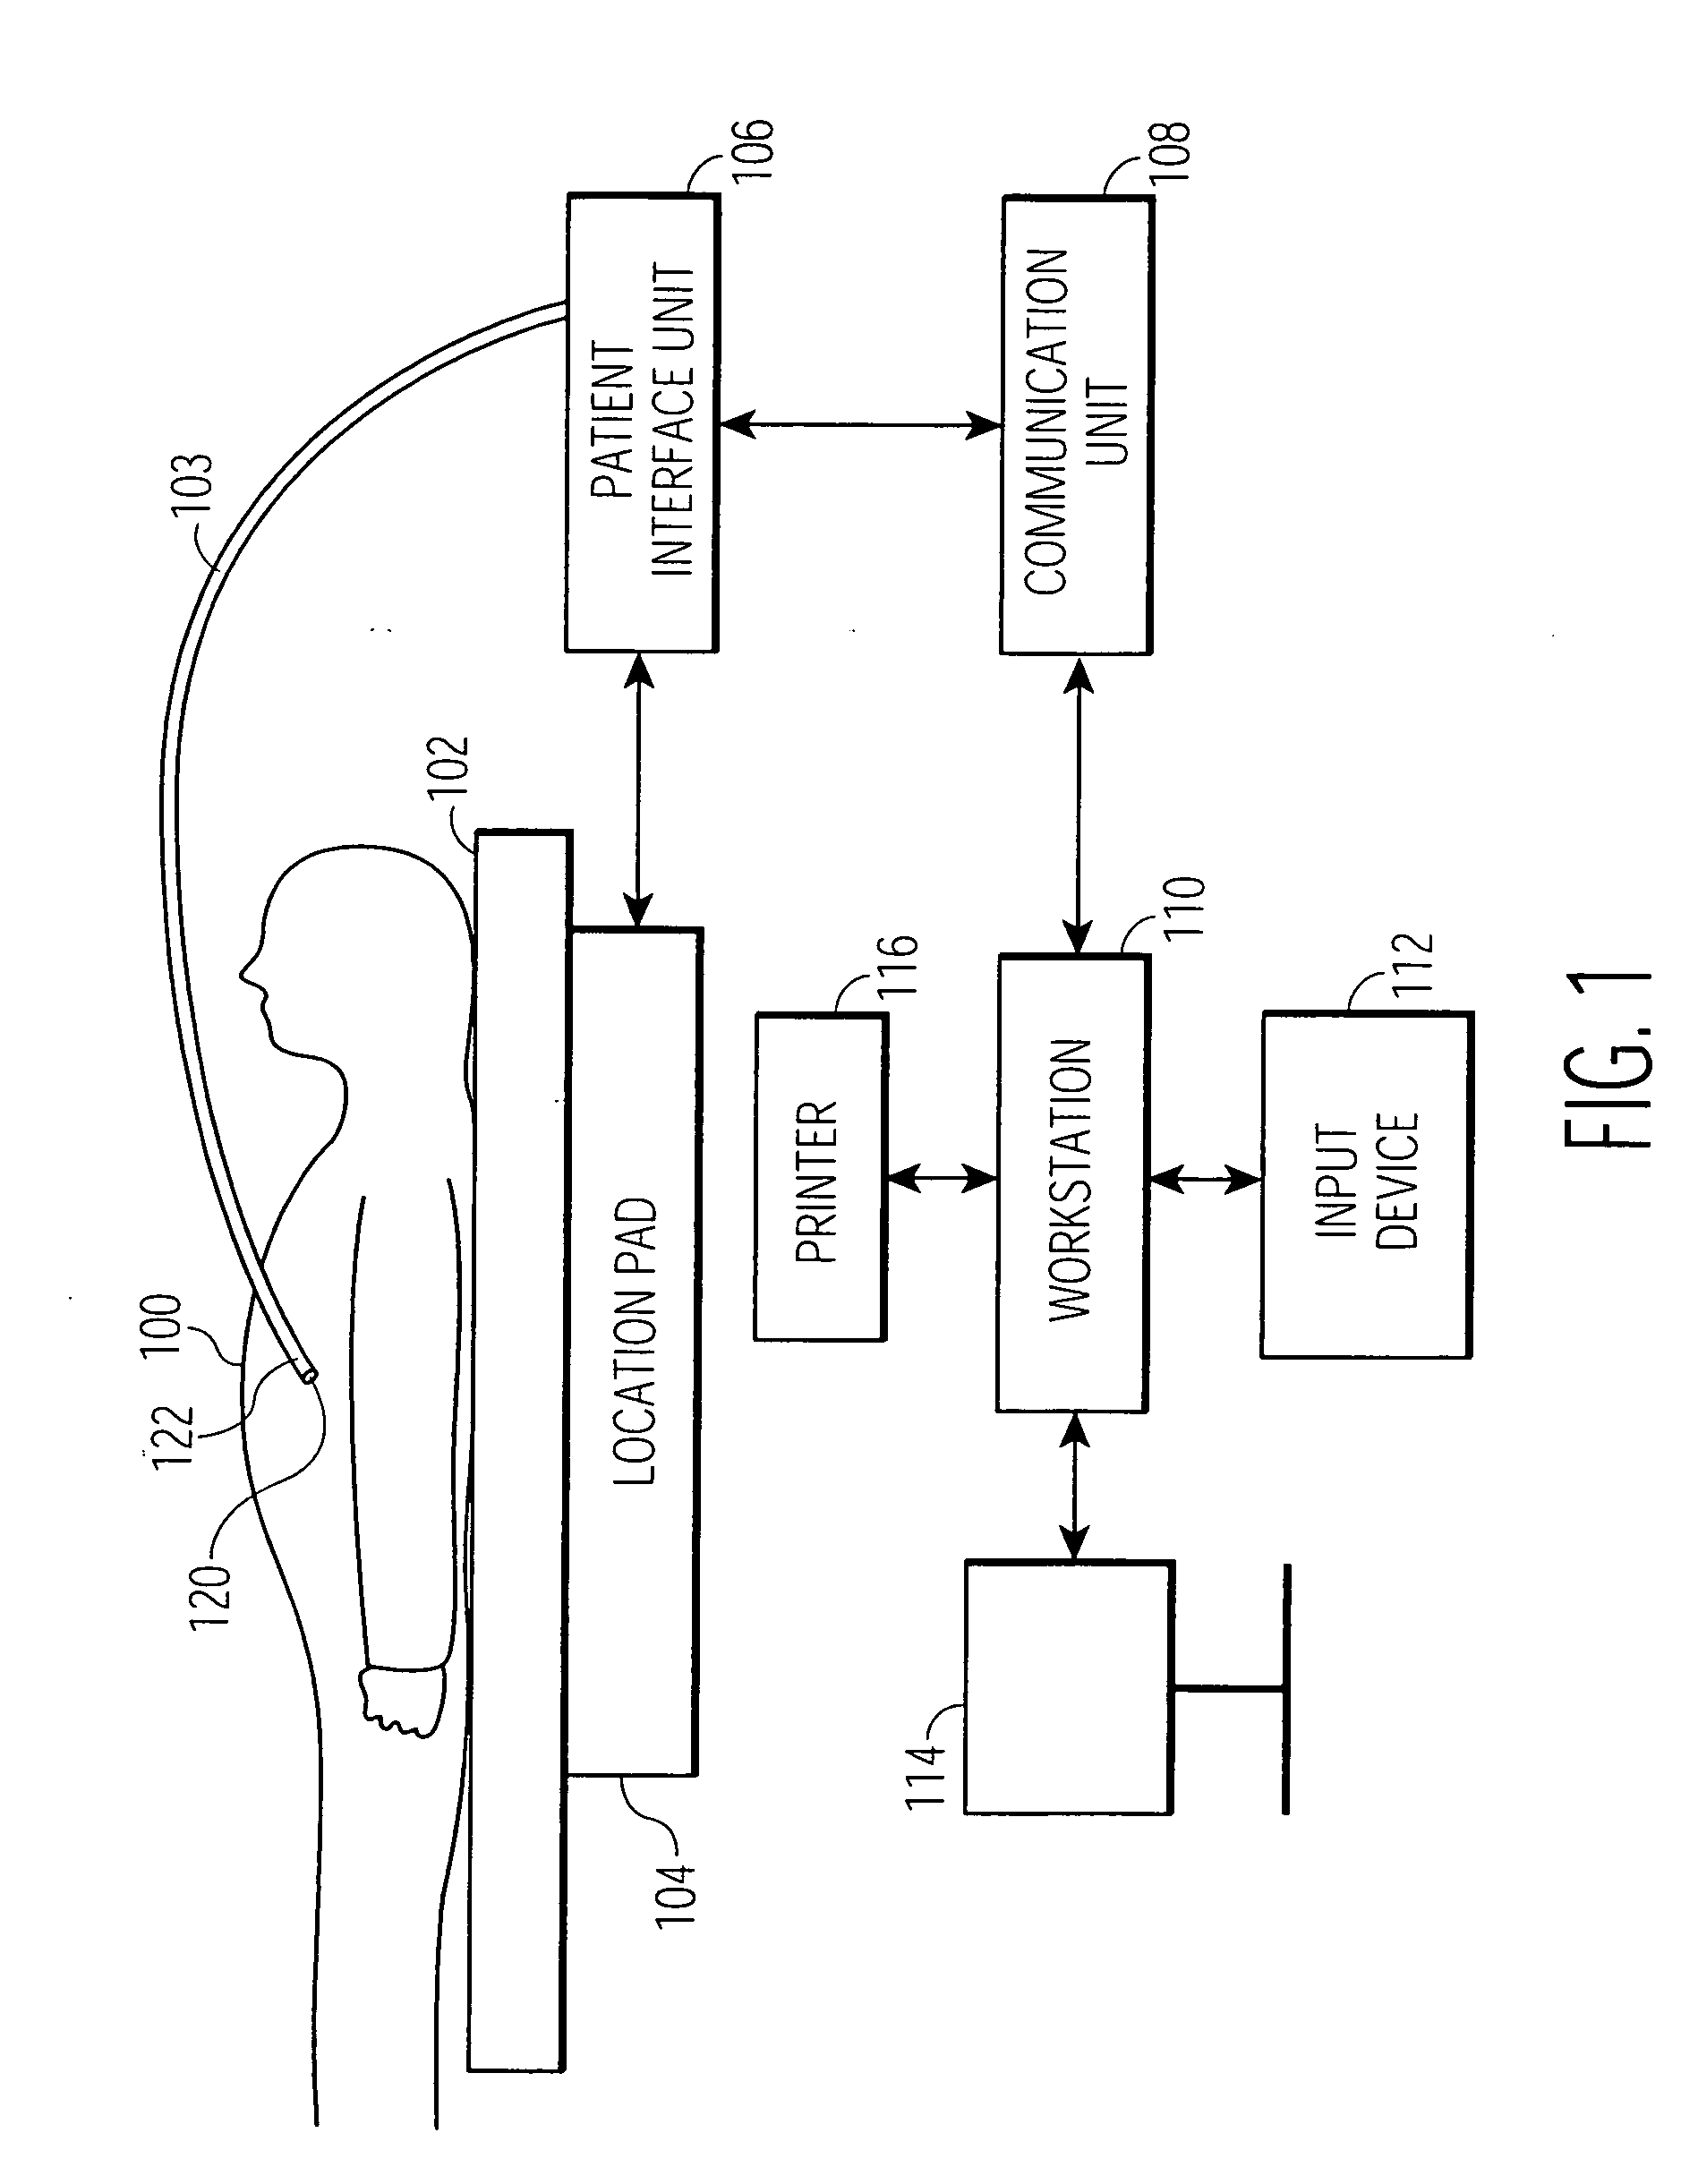 System and method for automatically registering three dimensional cardiac images with electro-anatomical cardiac mapping data